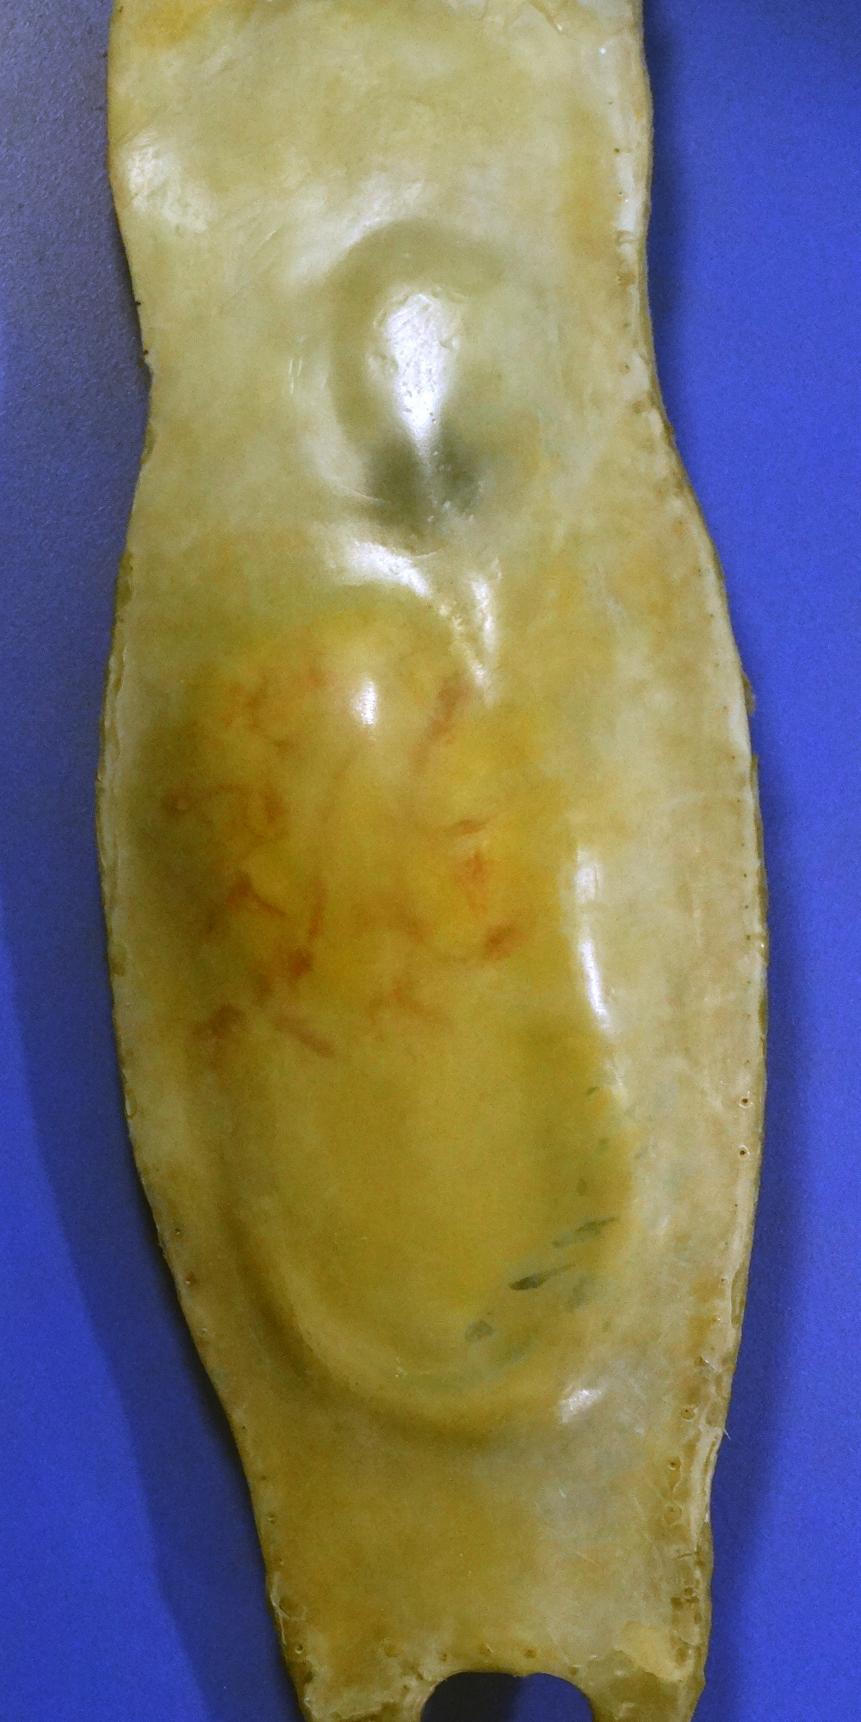 A Mermaid's purse, a casing that surrounds the fertilized eggs of some sharks, skates, and chimaeras. They are made of collagen protein strands (Photo by: Universal History Archive/Universal Images Group via Getty Images)